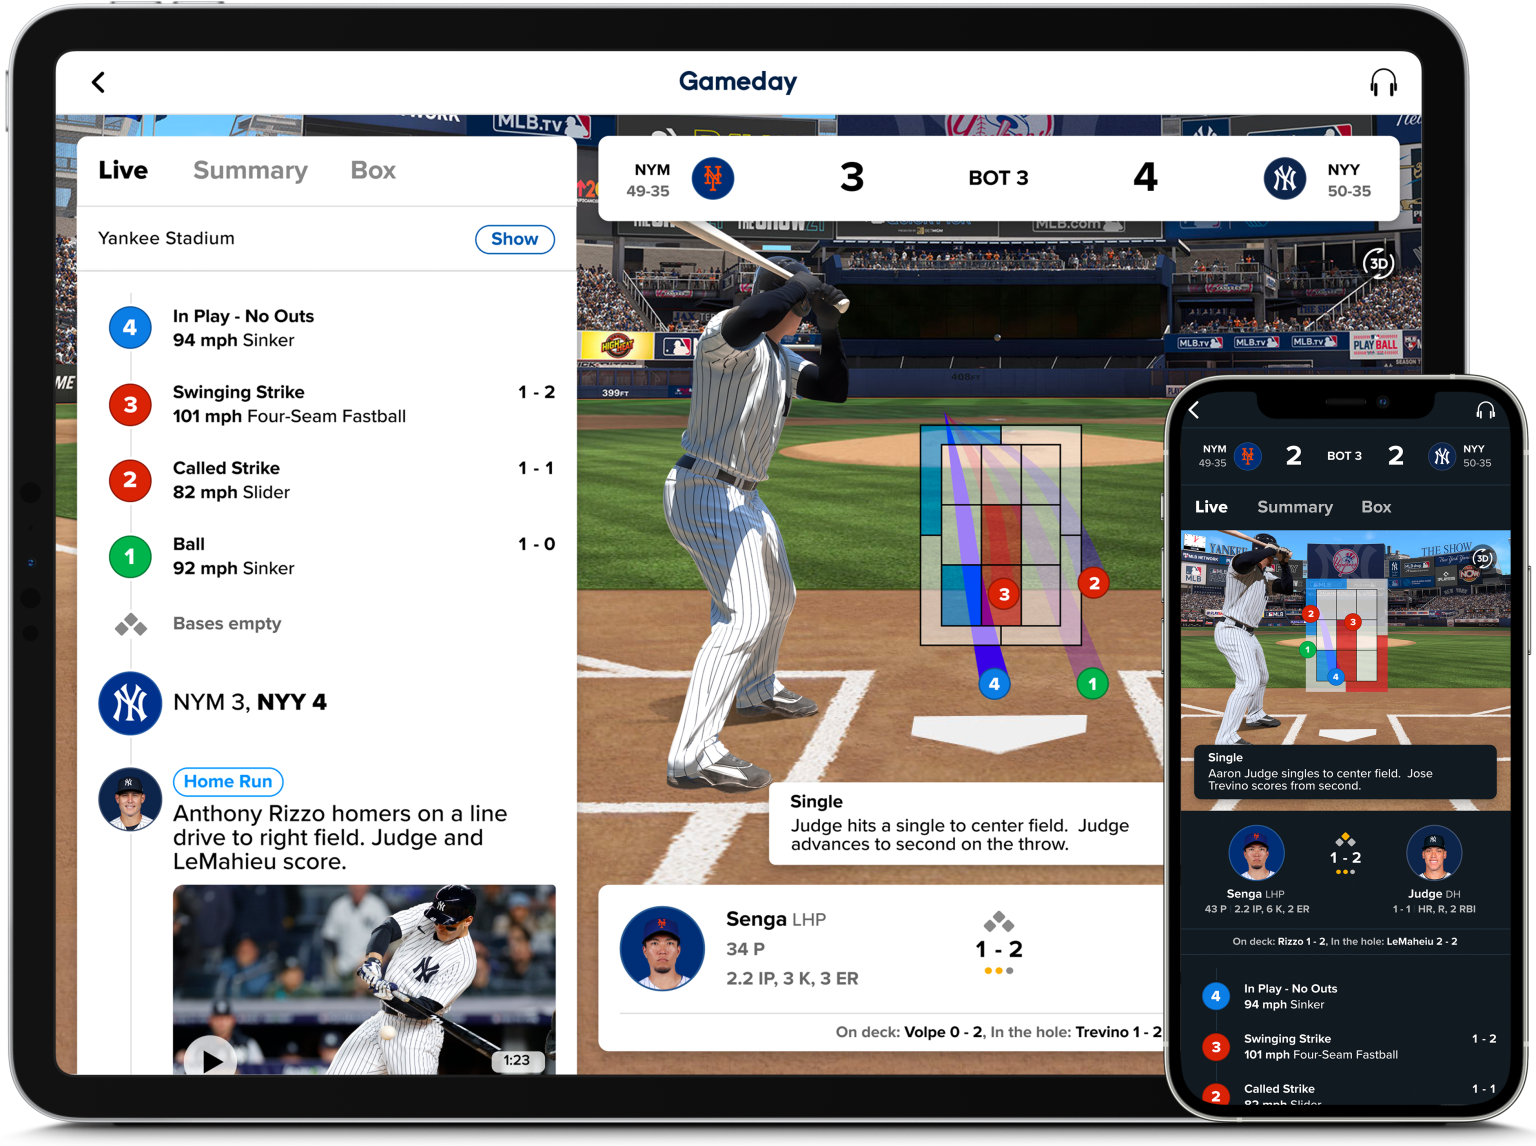 MLB Gameday Realtime MLB scores for your favorite teams